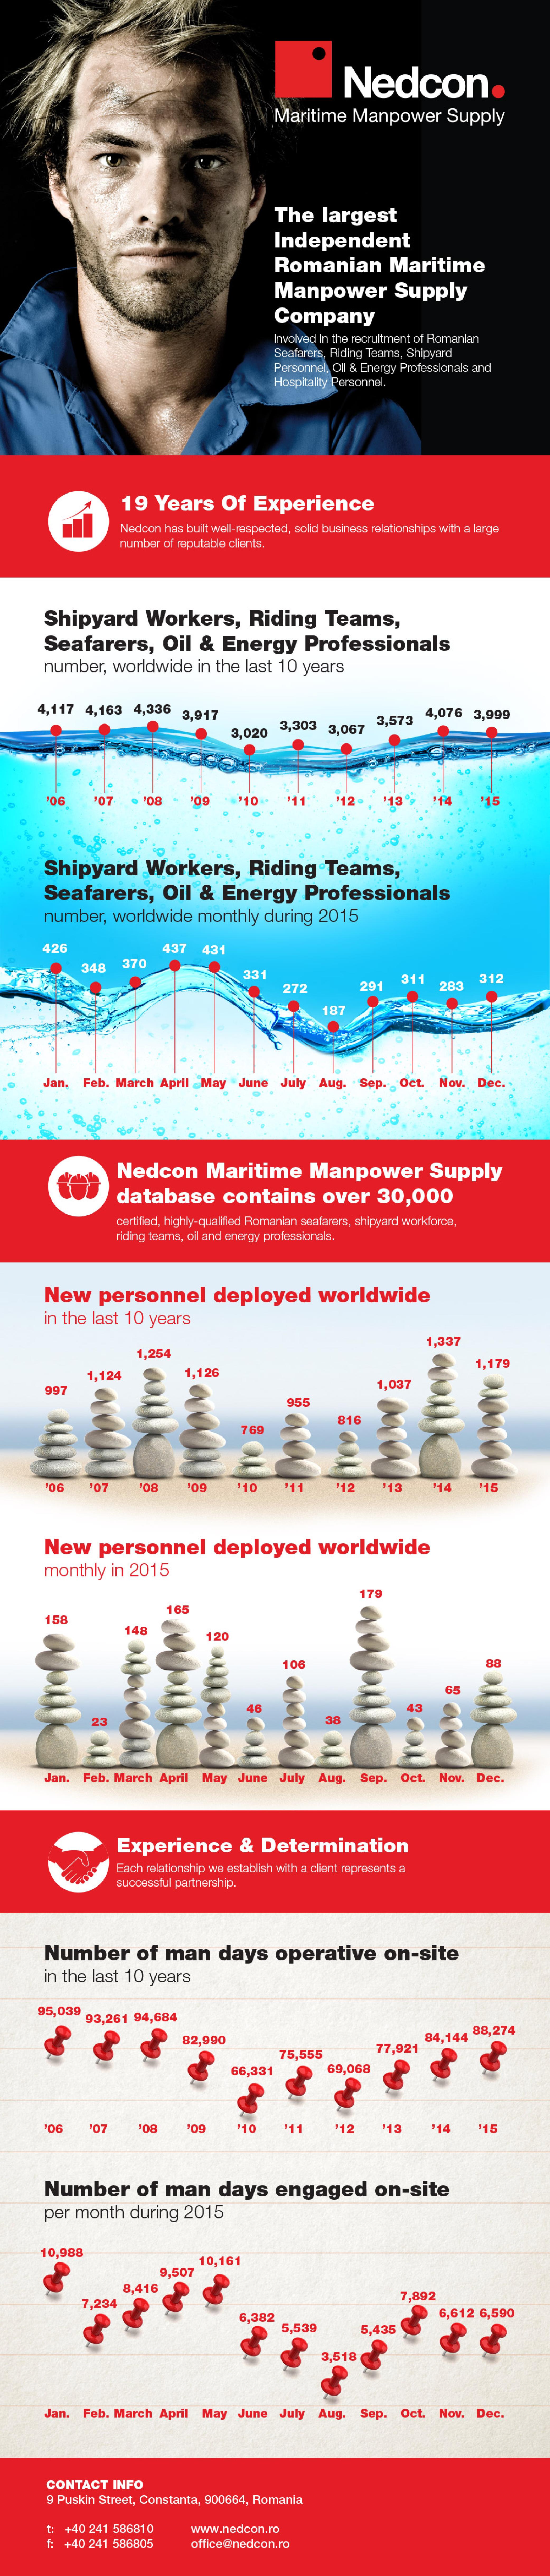 Nedcon Maritime Manpower Supply Infographic-page-001